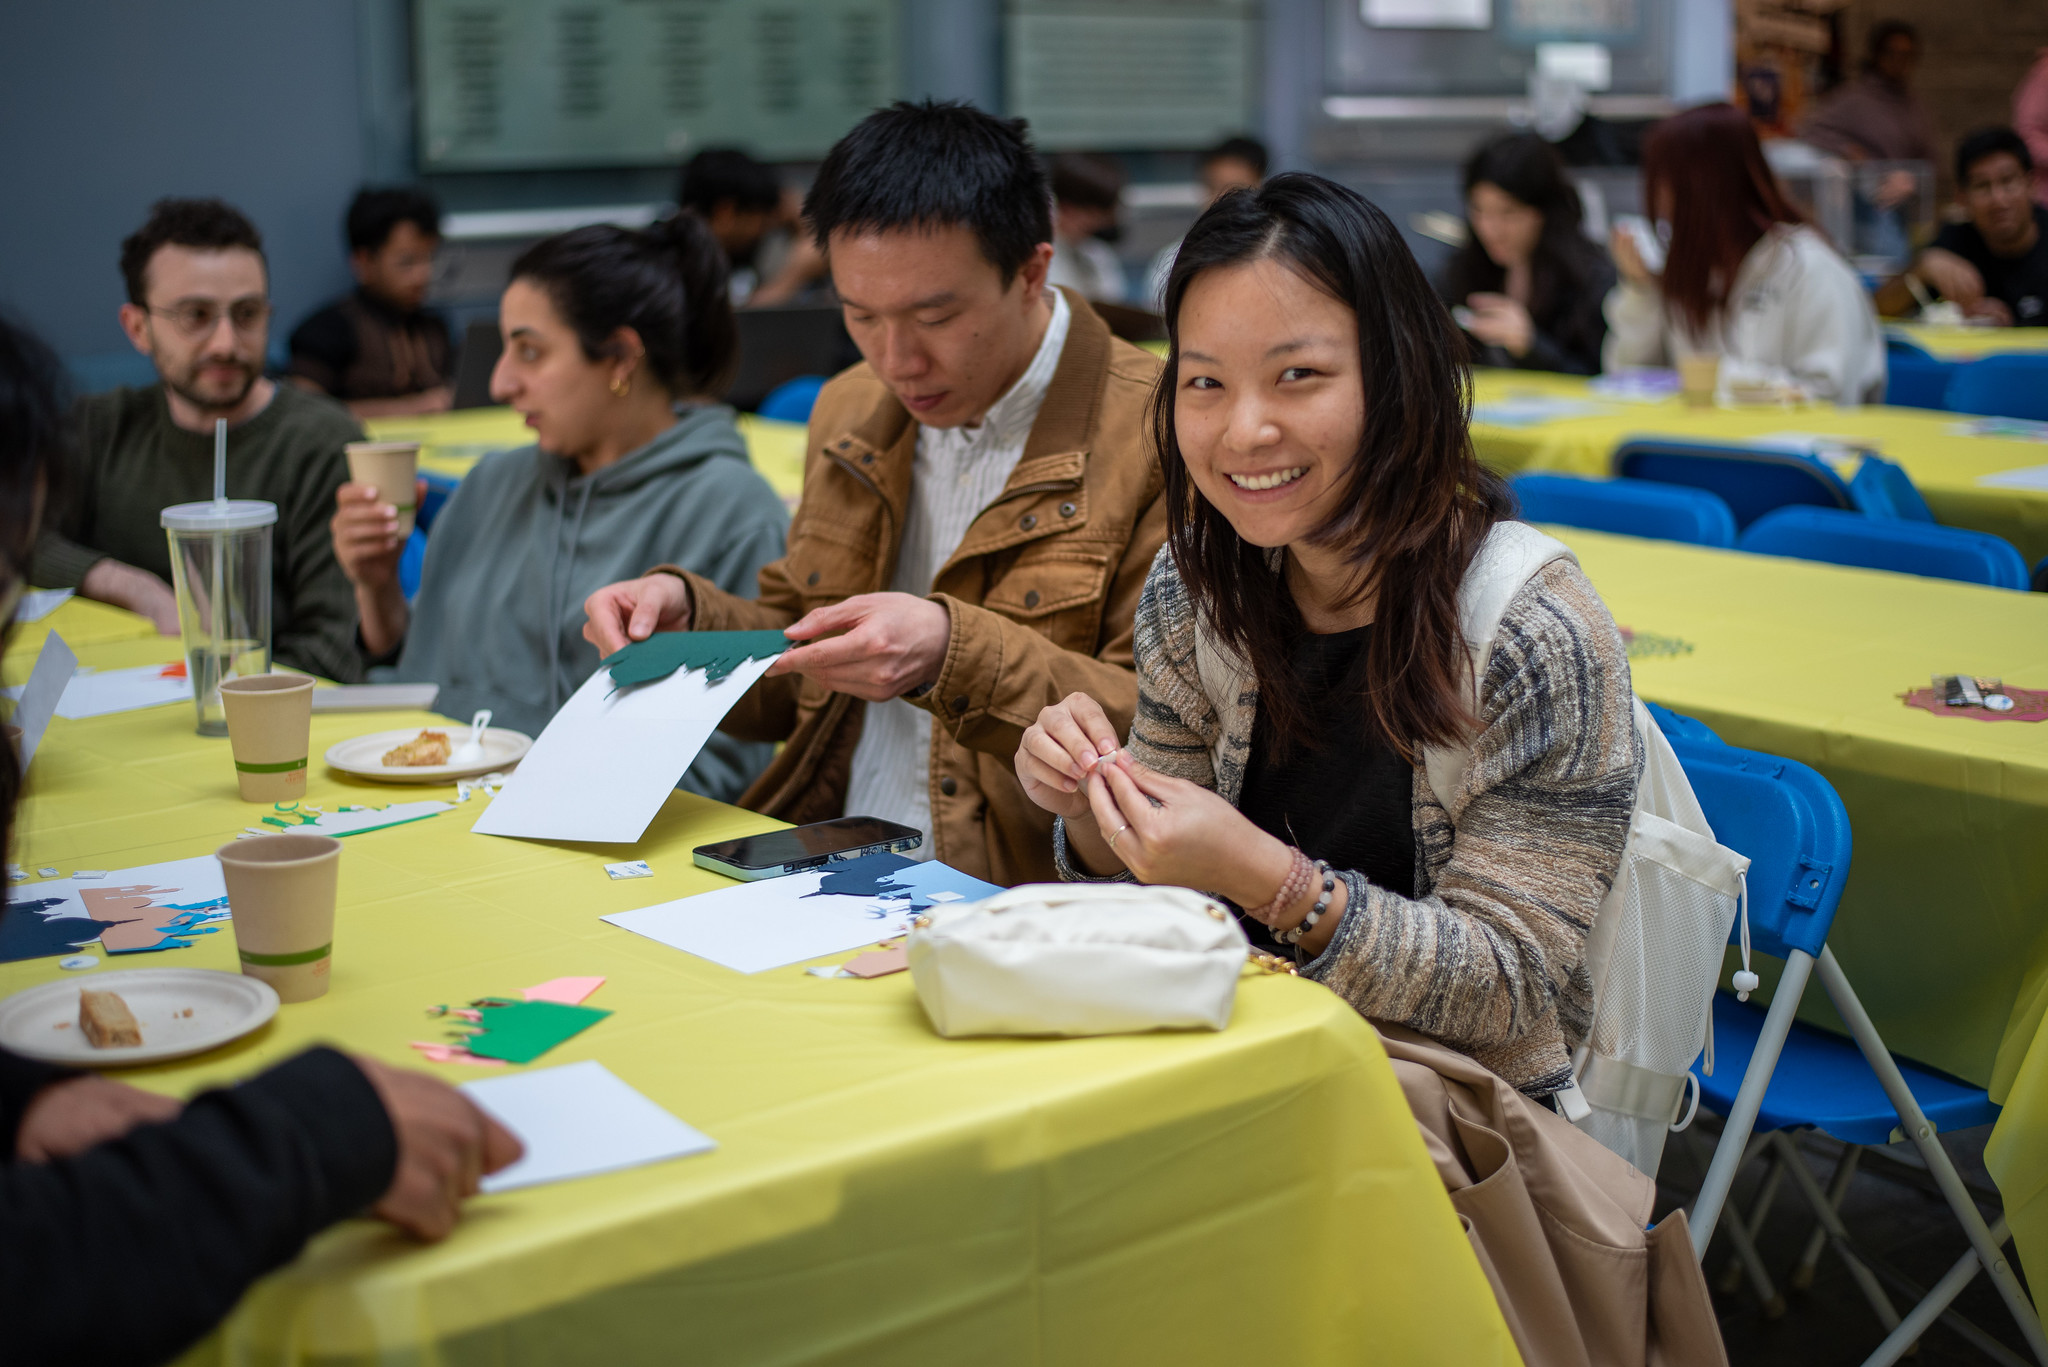 Students sit at a long table with a yellow tablecloth. They are working on craft, attaching colorful paper cutouts to cards. The student on the right is smiling  at the camera.